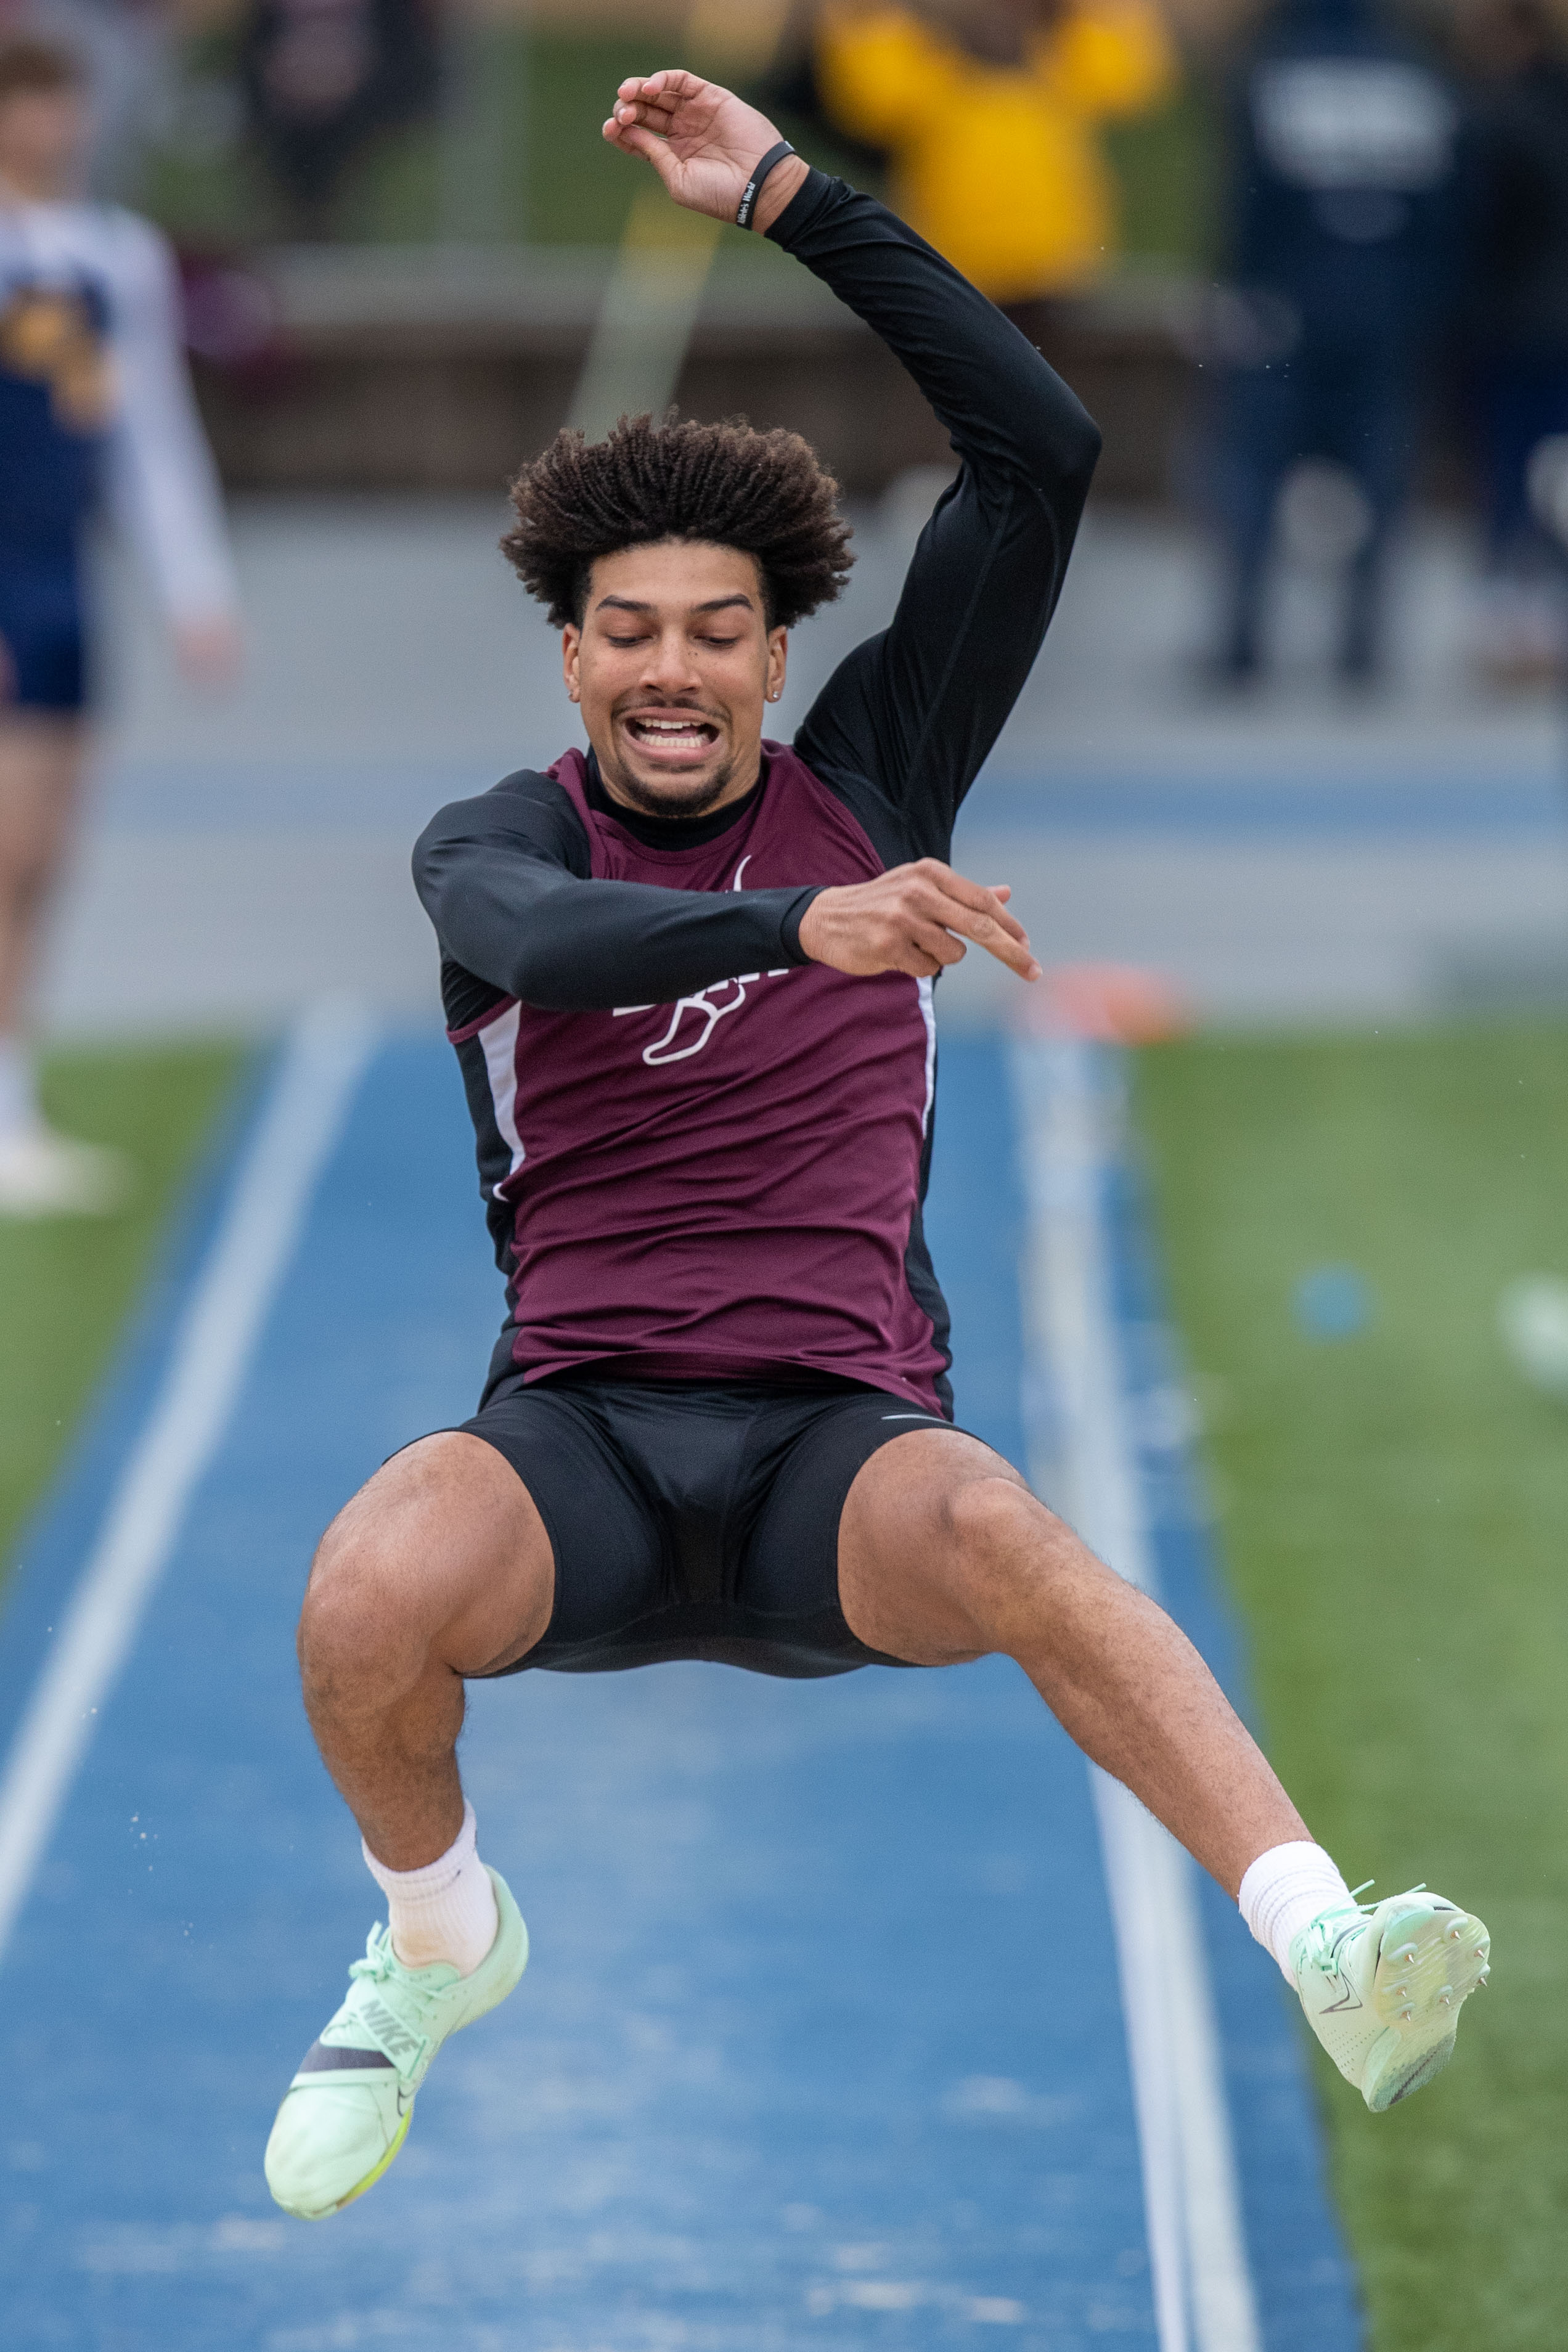 Spender Edey, Shippensburg, wins the triple jump, with a mark of 44’ 3.5” at the 2023 Tim Cook Memorial Invitational track & field meet at Chambersburg, Pa., Mar. 25, 2023.Mark Pynes | pennlive.com